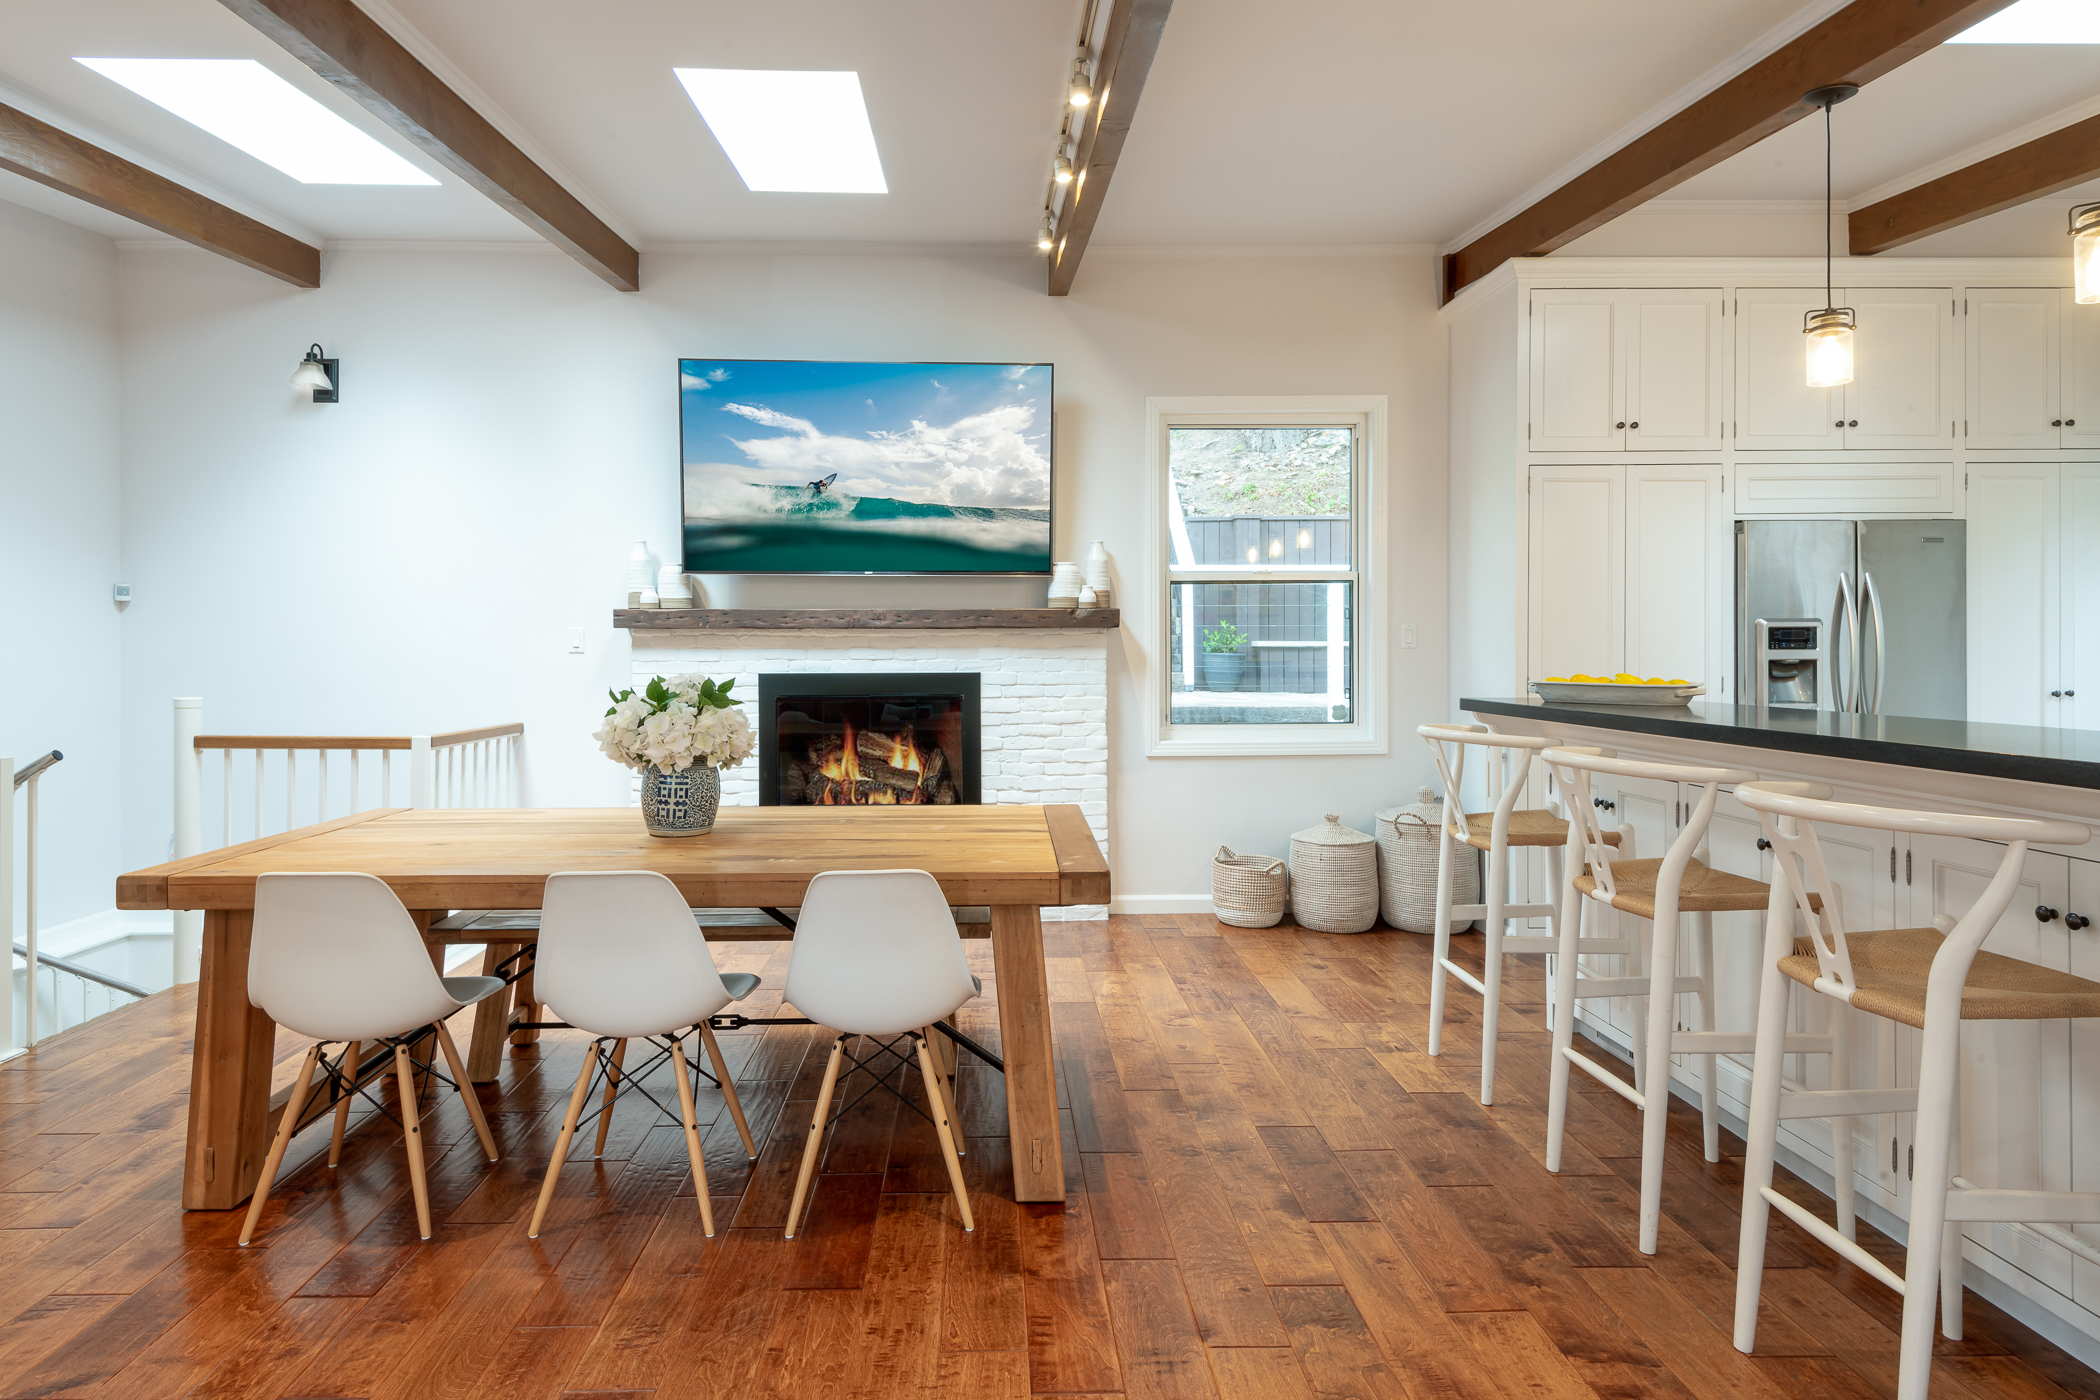 Bright dining room with wood exposed beams and hand hewn floor